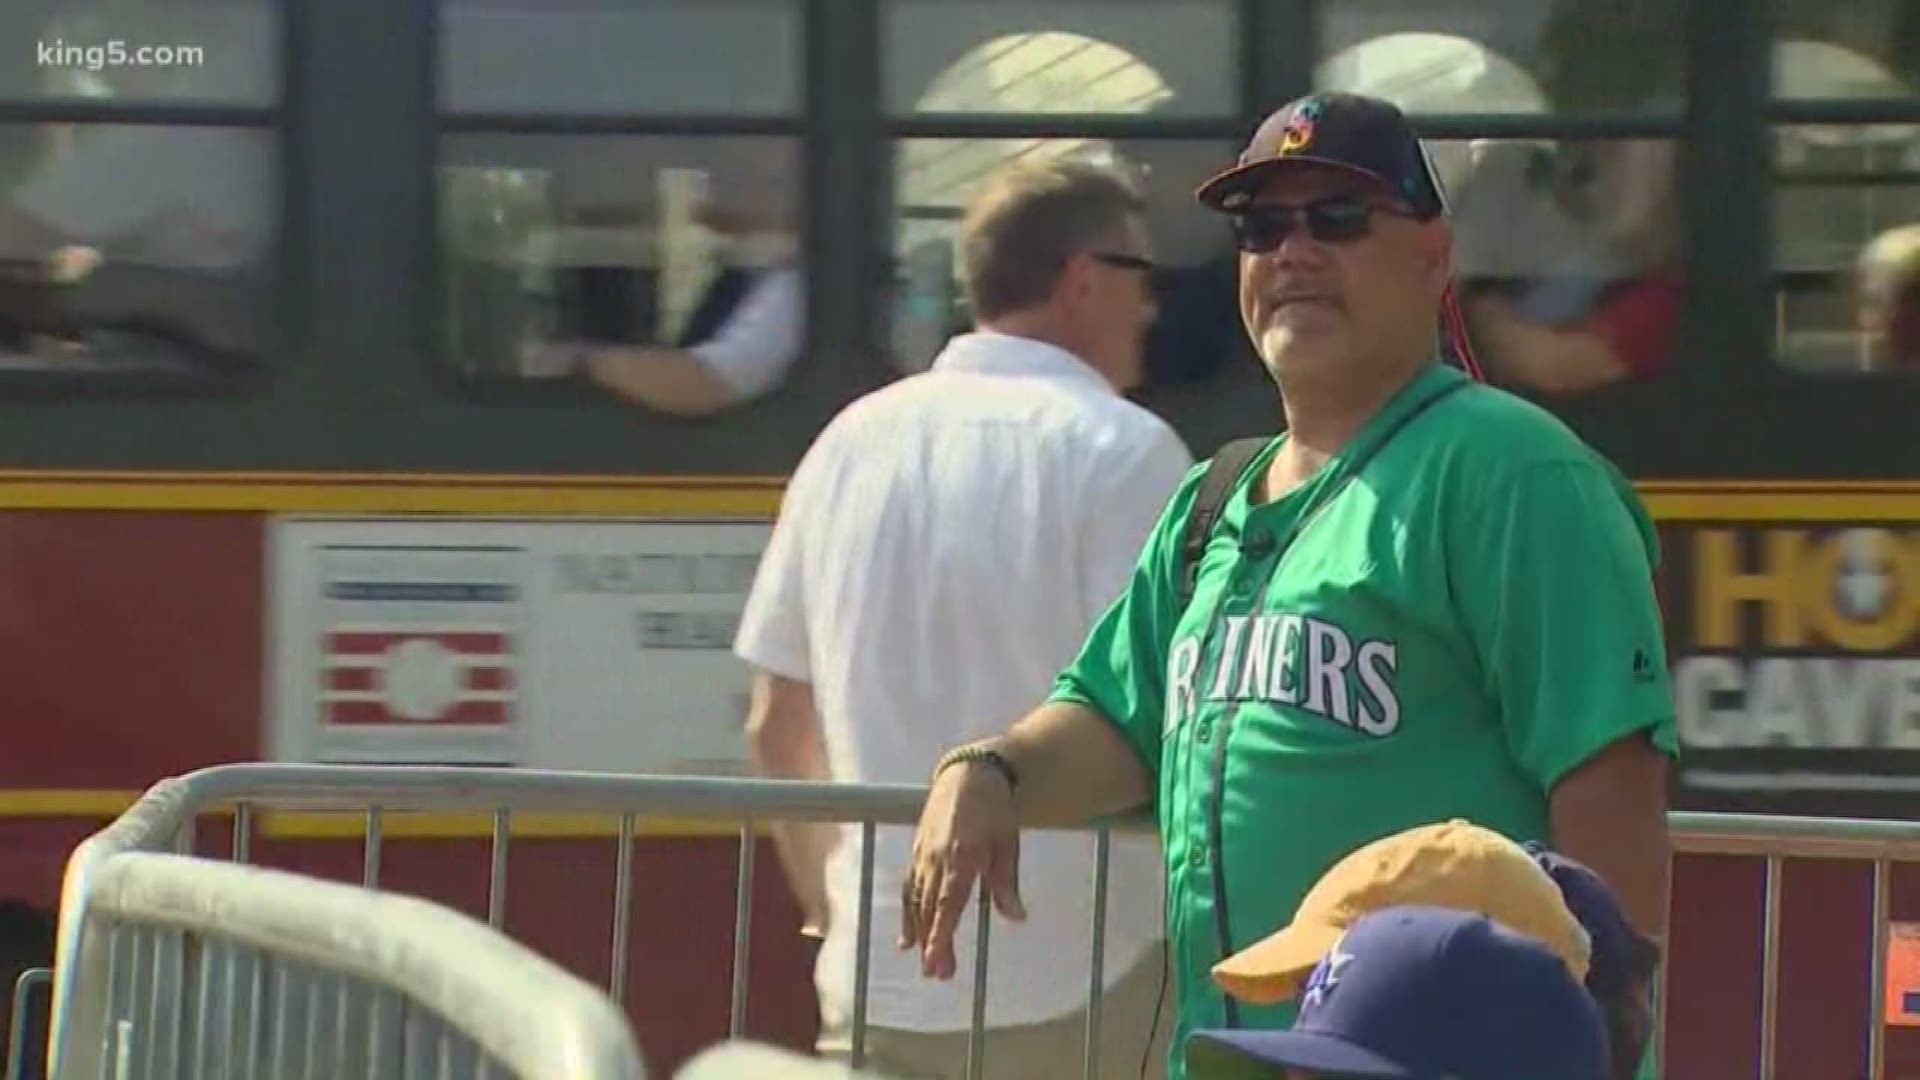 Mariners fans are taking over Cooperstown's this weekend to witness Edgar Martinez get inducted into the hall of fame.